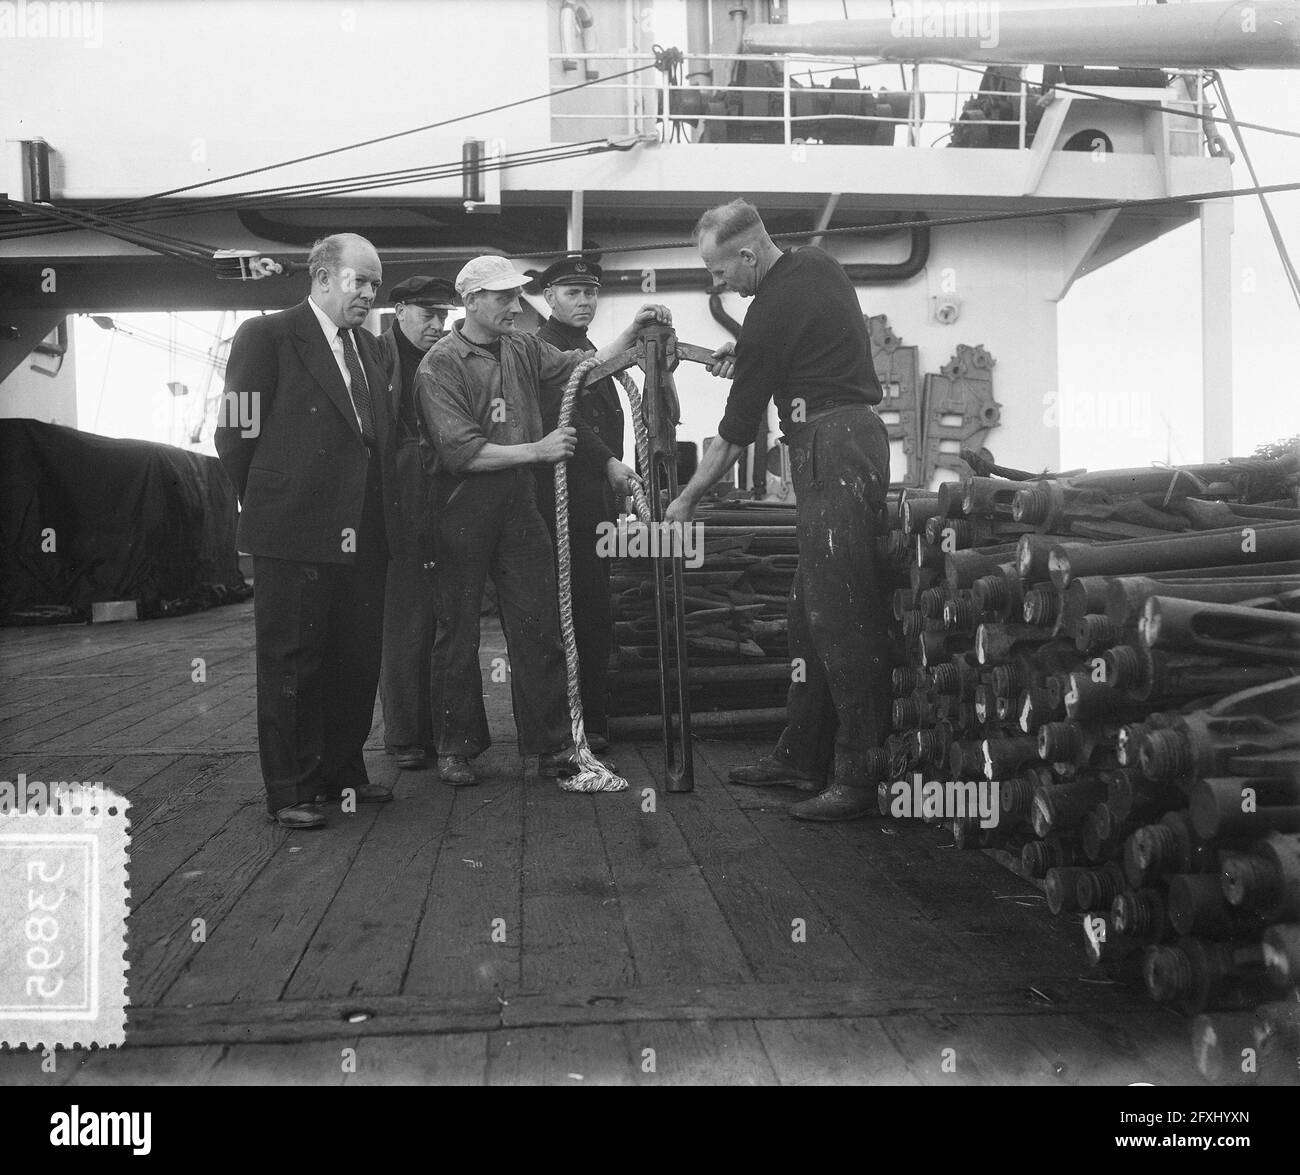 Willem Barends departs whaling, 30 October 1952, The Netherlands, 20th century press agency photo, news to remember, documentary, historic photography 1945-1990, visual stories, human history of the Twentieth Century, capturing moments in time Stock Photo